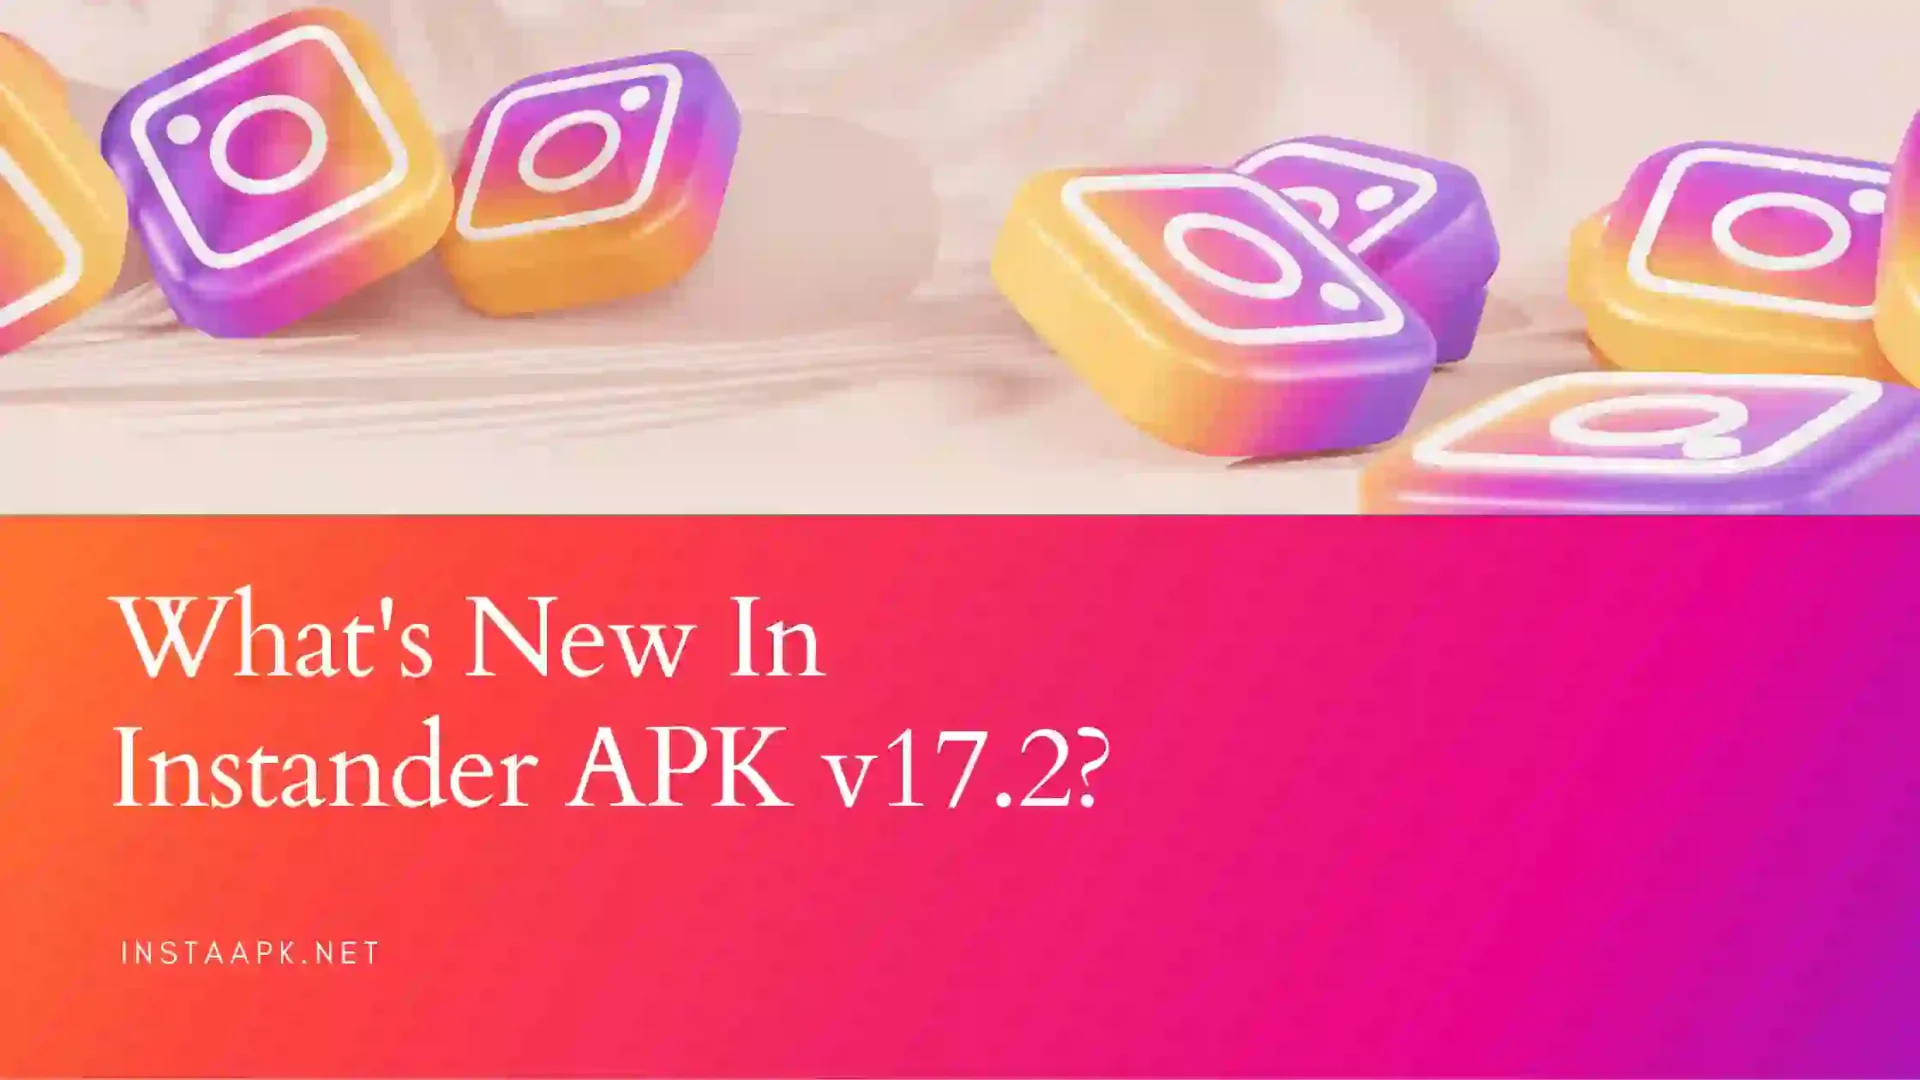 What's New In Instander APK v17.2?